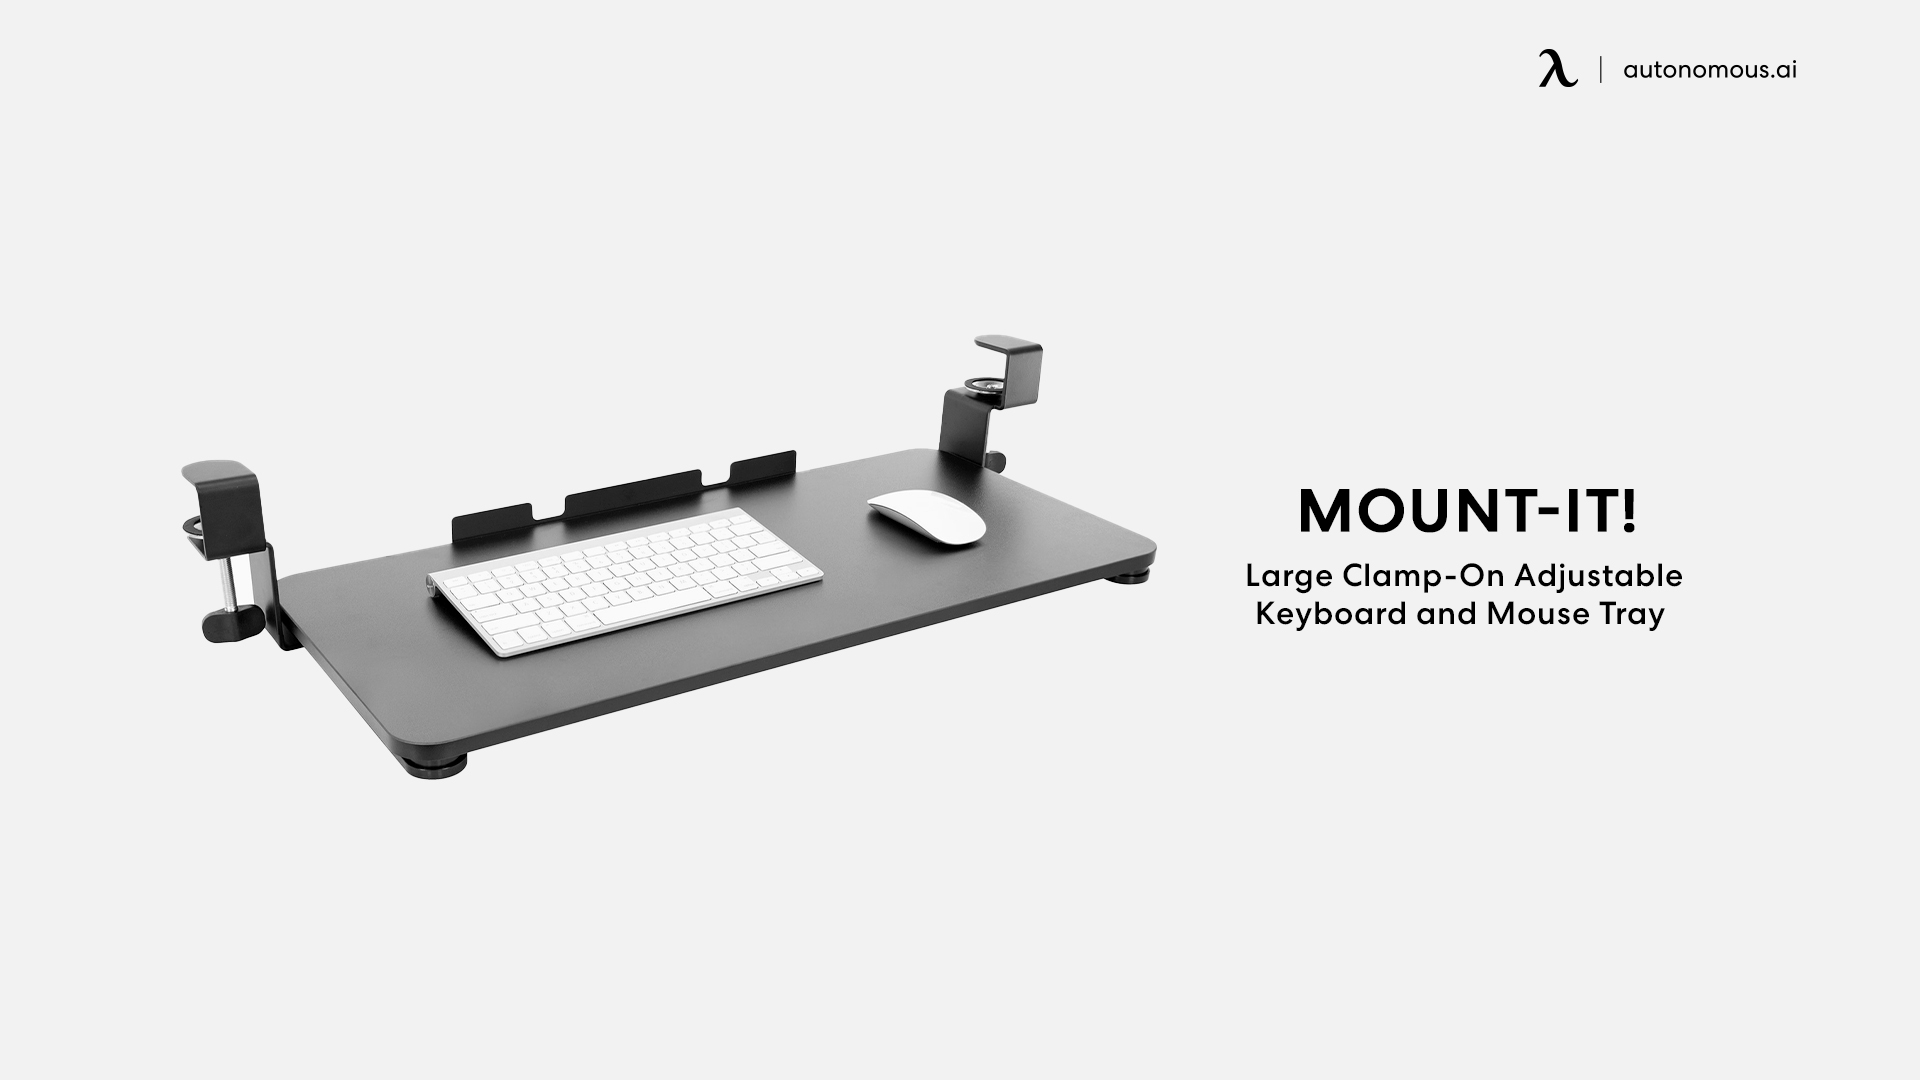 Clamp-on Keyboard Tray by Mount-It!